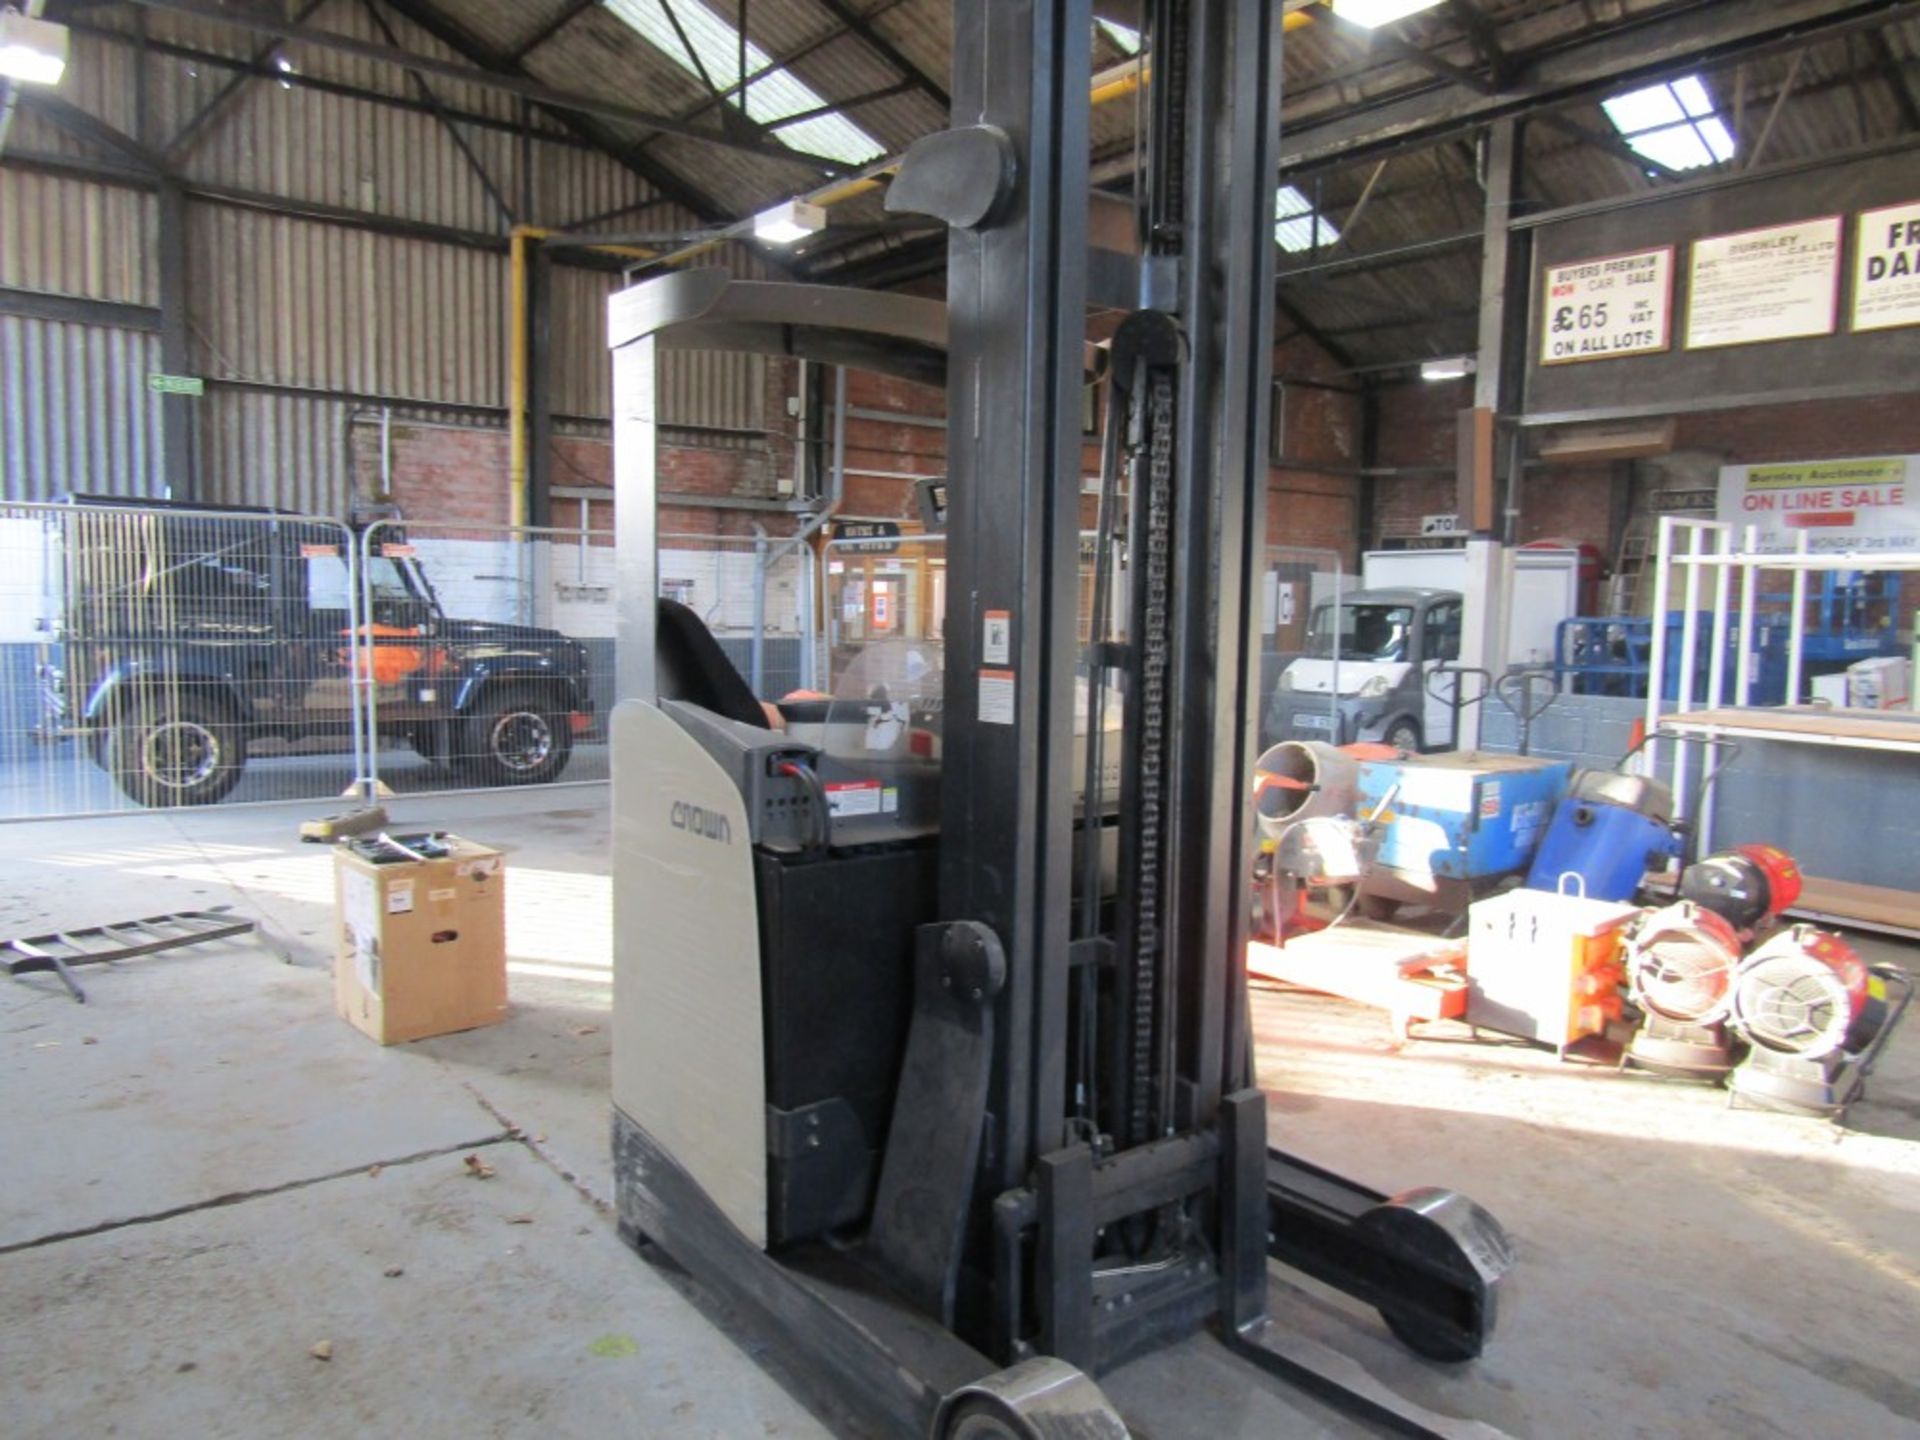 2014 CROWN TRIPLE MAST REACH TRUCK WAREHOUSE FORK LIFT C/W CHARGER. STARTS, DRIVES & LIFTS. IN DAILY - Image 4 of 7